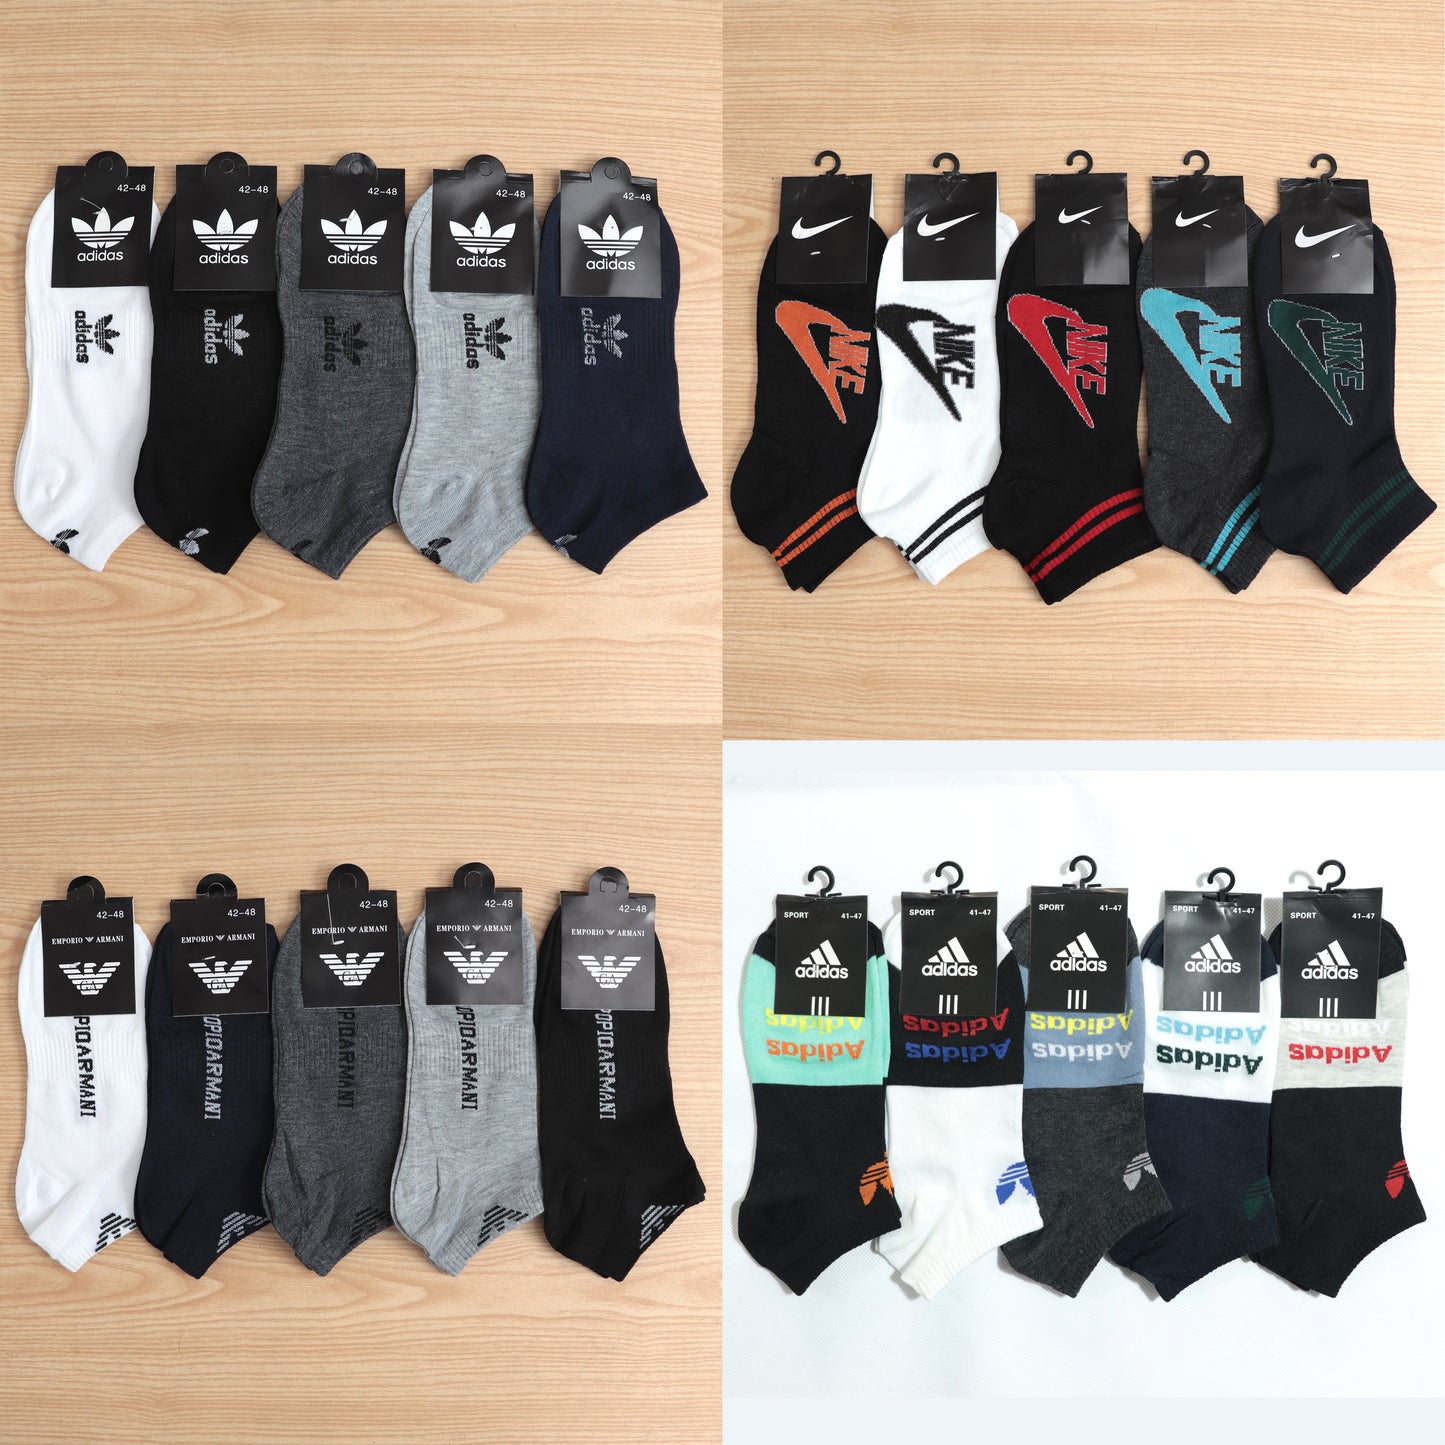 SKS-A1-BUNDLE OFFER 4 PACKS OF "PACK OF 5" IMPORTED ANKLE SOCKS (20 PAIRS)